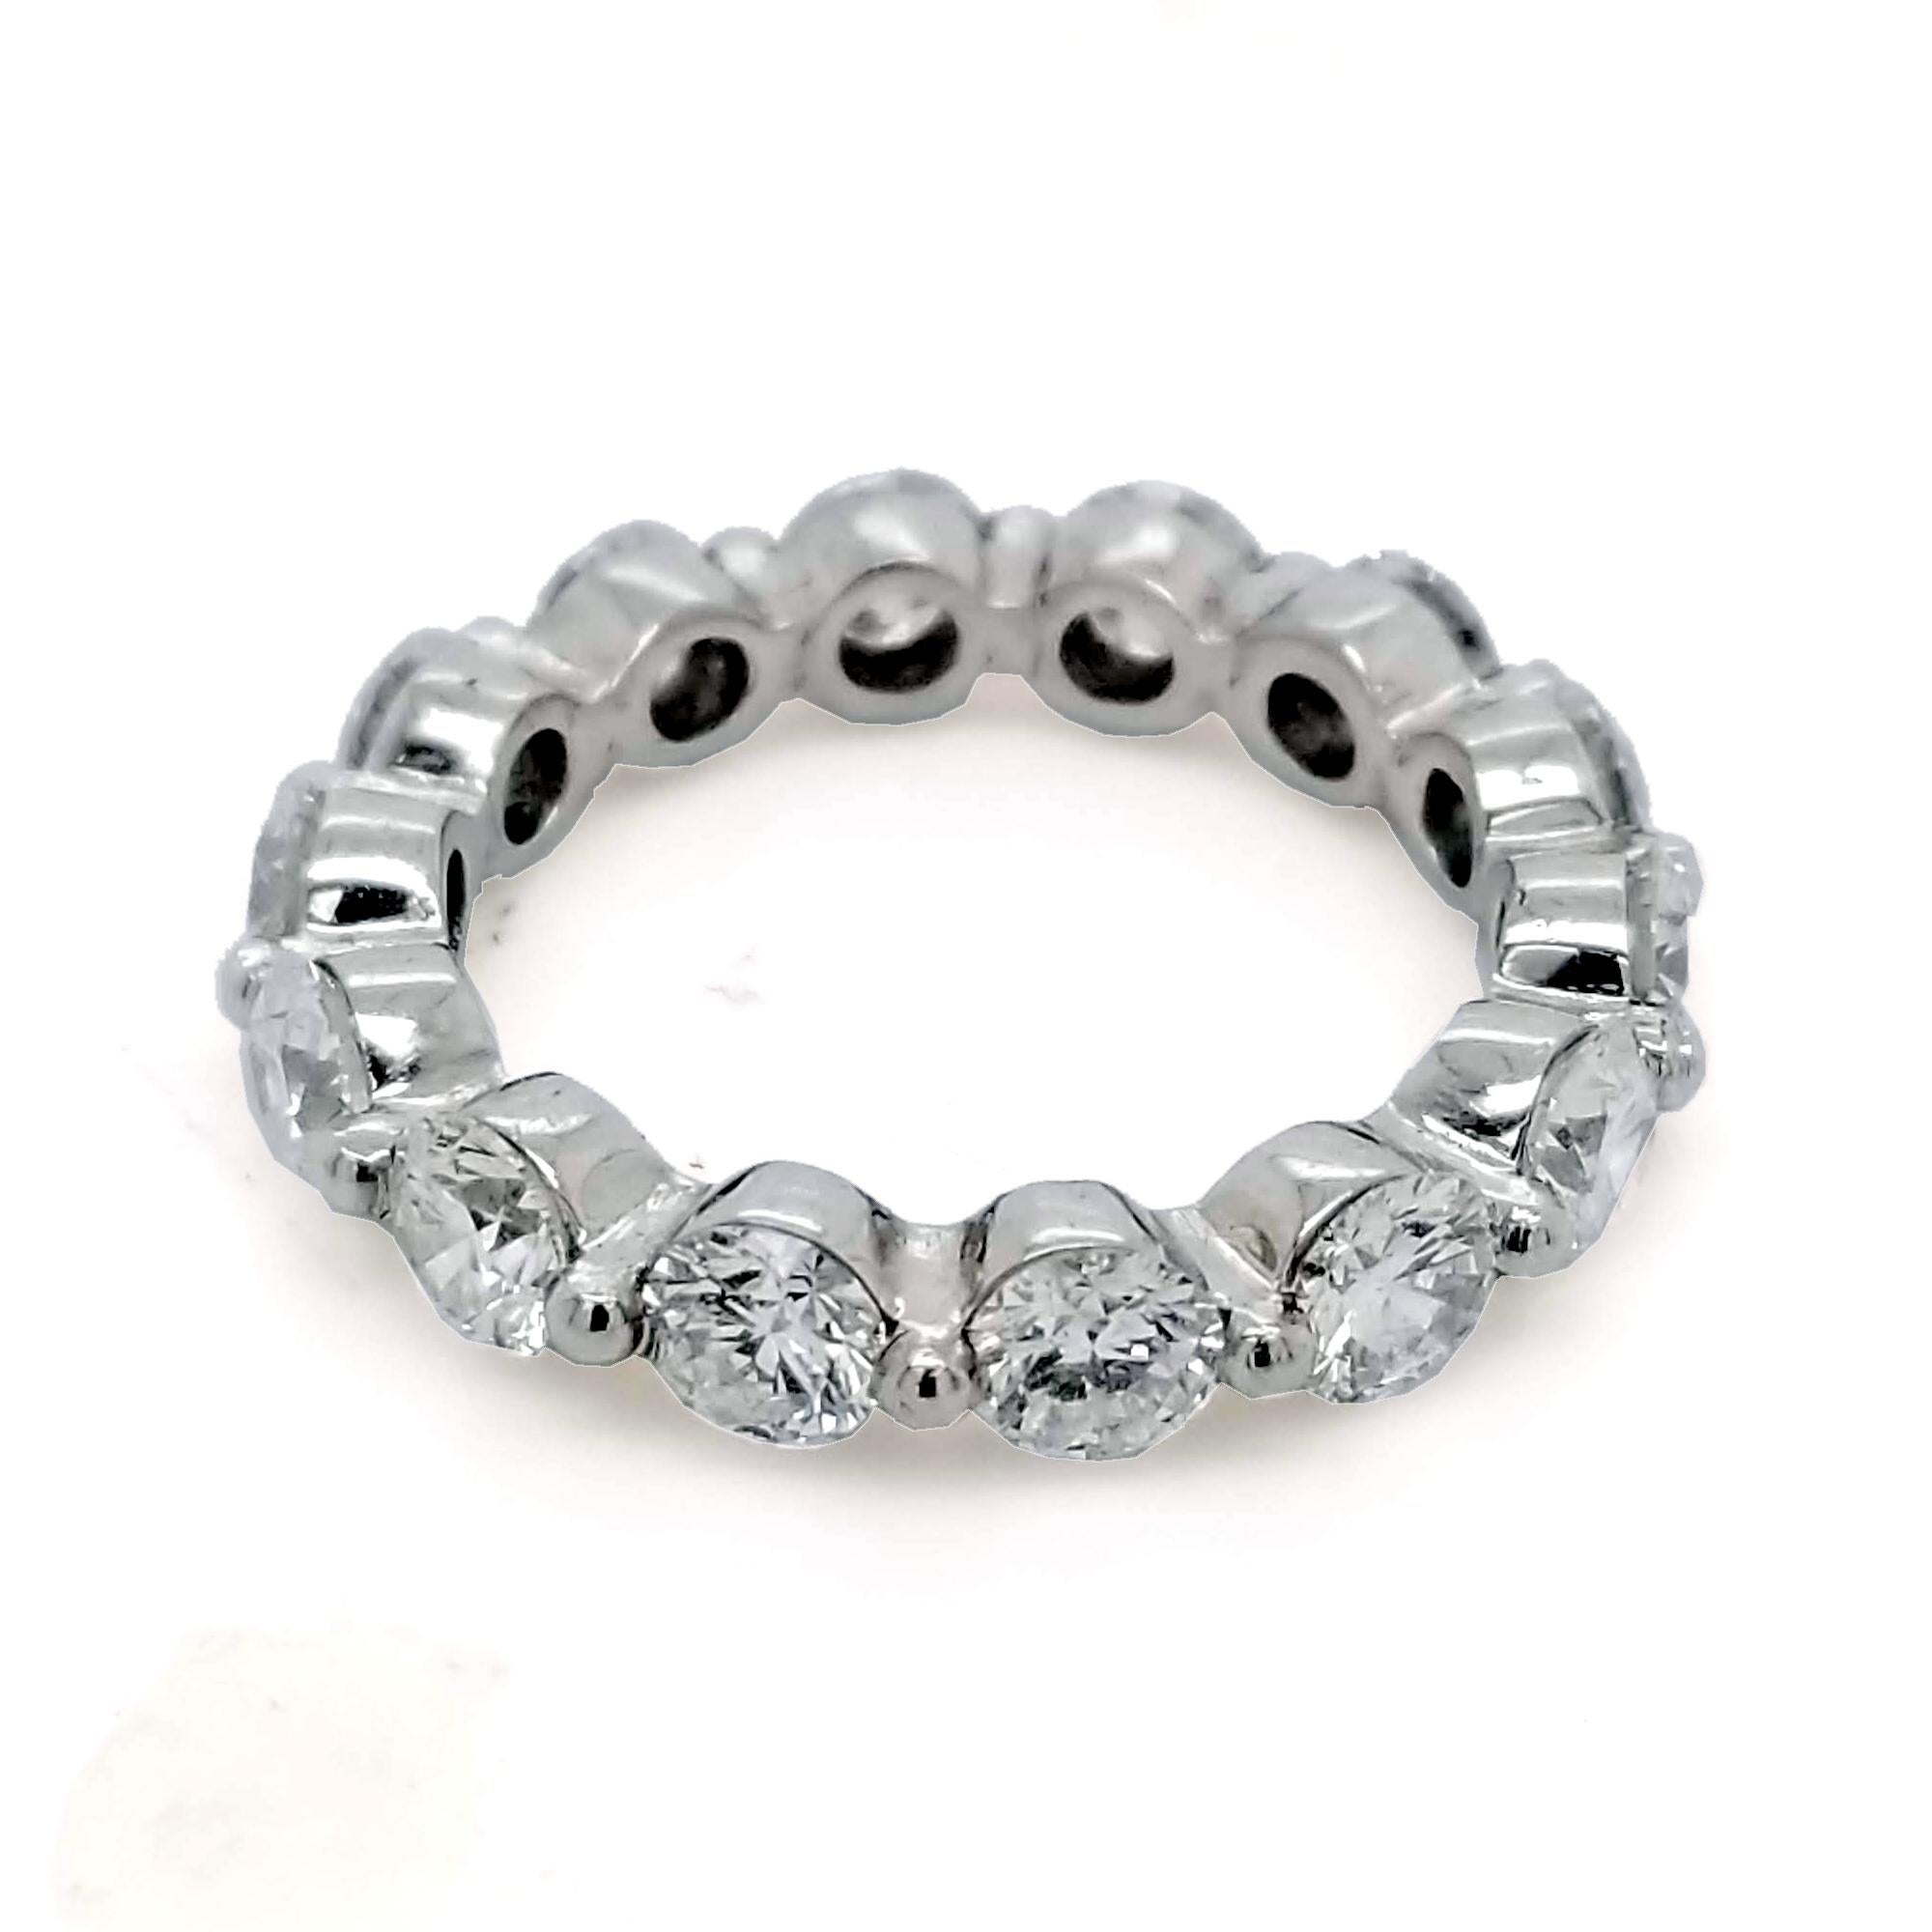 This beautiful Eternity Ring is made in Platinum with 14 perfectly matched 4mm Round Brilliant Diamonds Set in Shared Prong Mode In a platinum mounting.
Total Weight of diamonds: 3.51 Ct  SI/F-G
Total Weight of the Ring: 6.67 Gr Platinum
Ring Size: